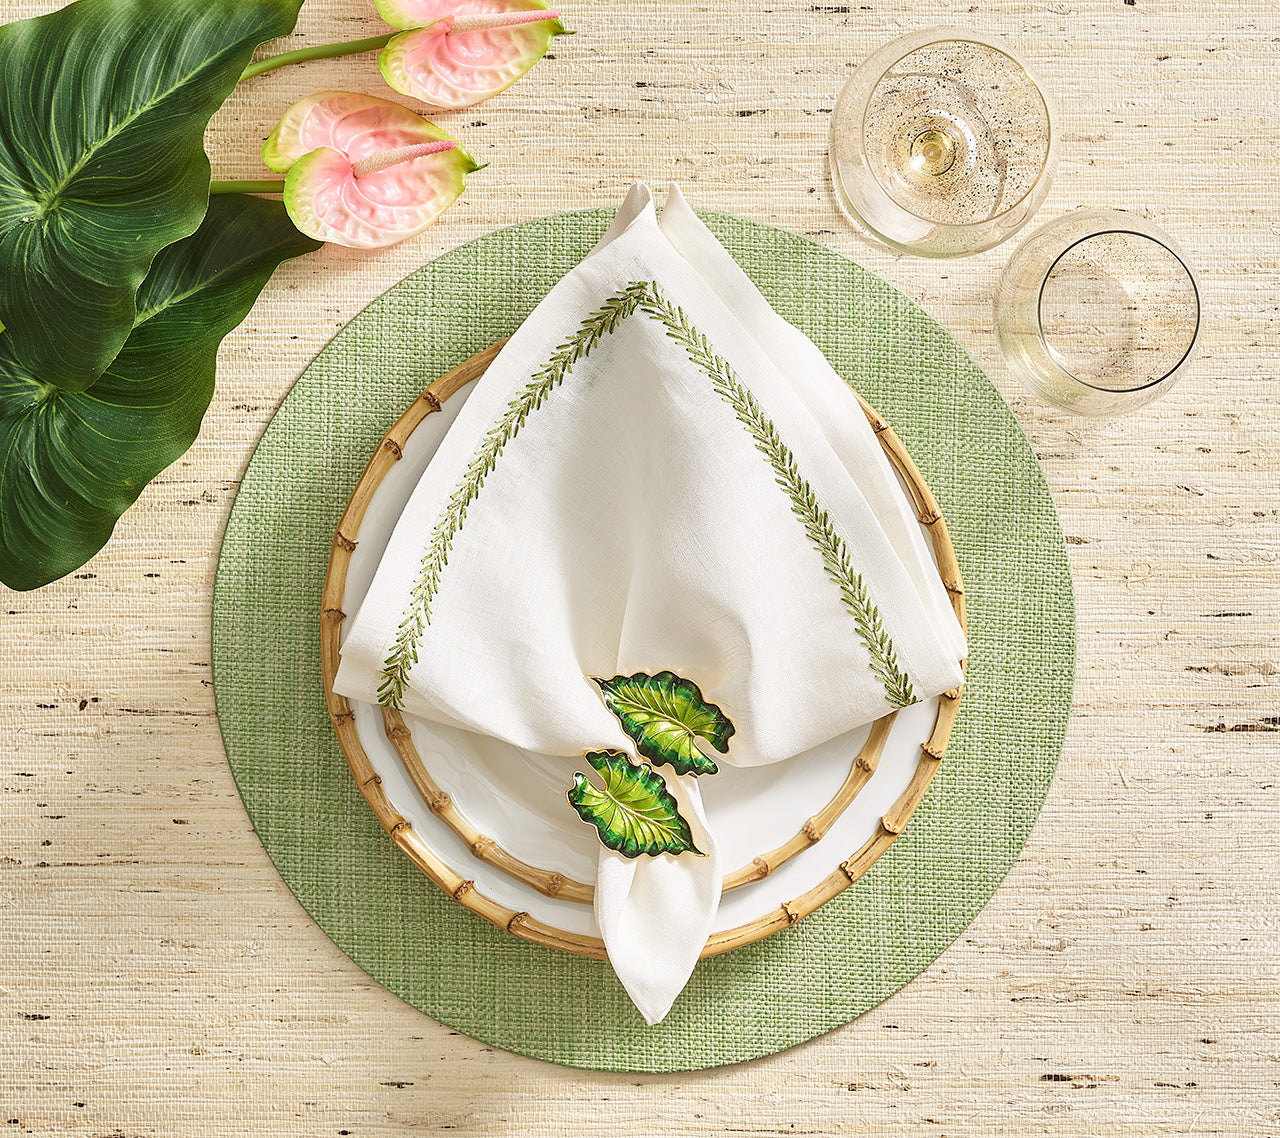 Green Portofino Placemat underneath a bamboo-rimmed plates and a white napkin held by a green leaf napkin ring